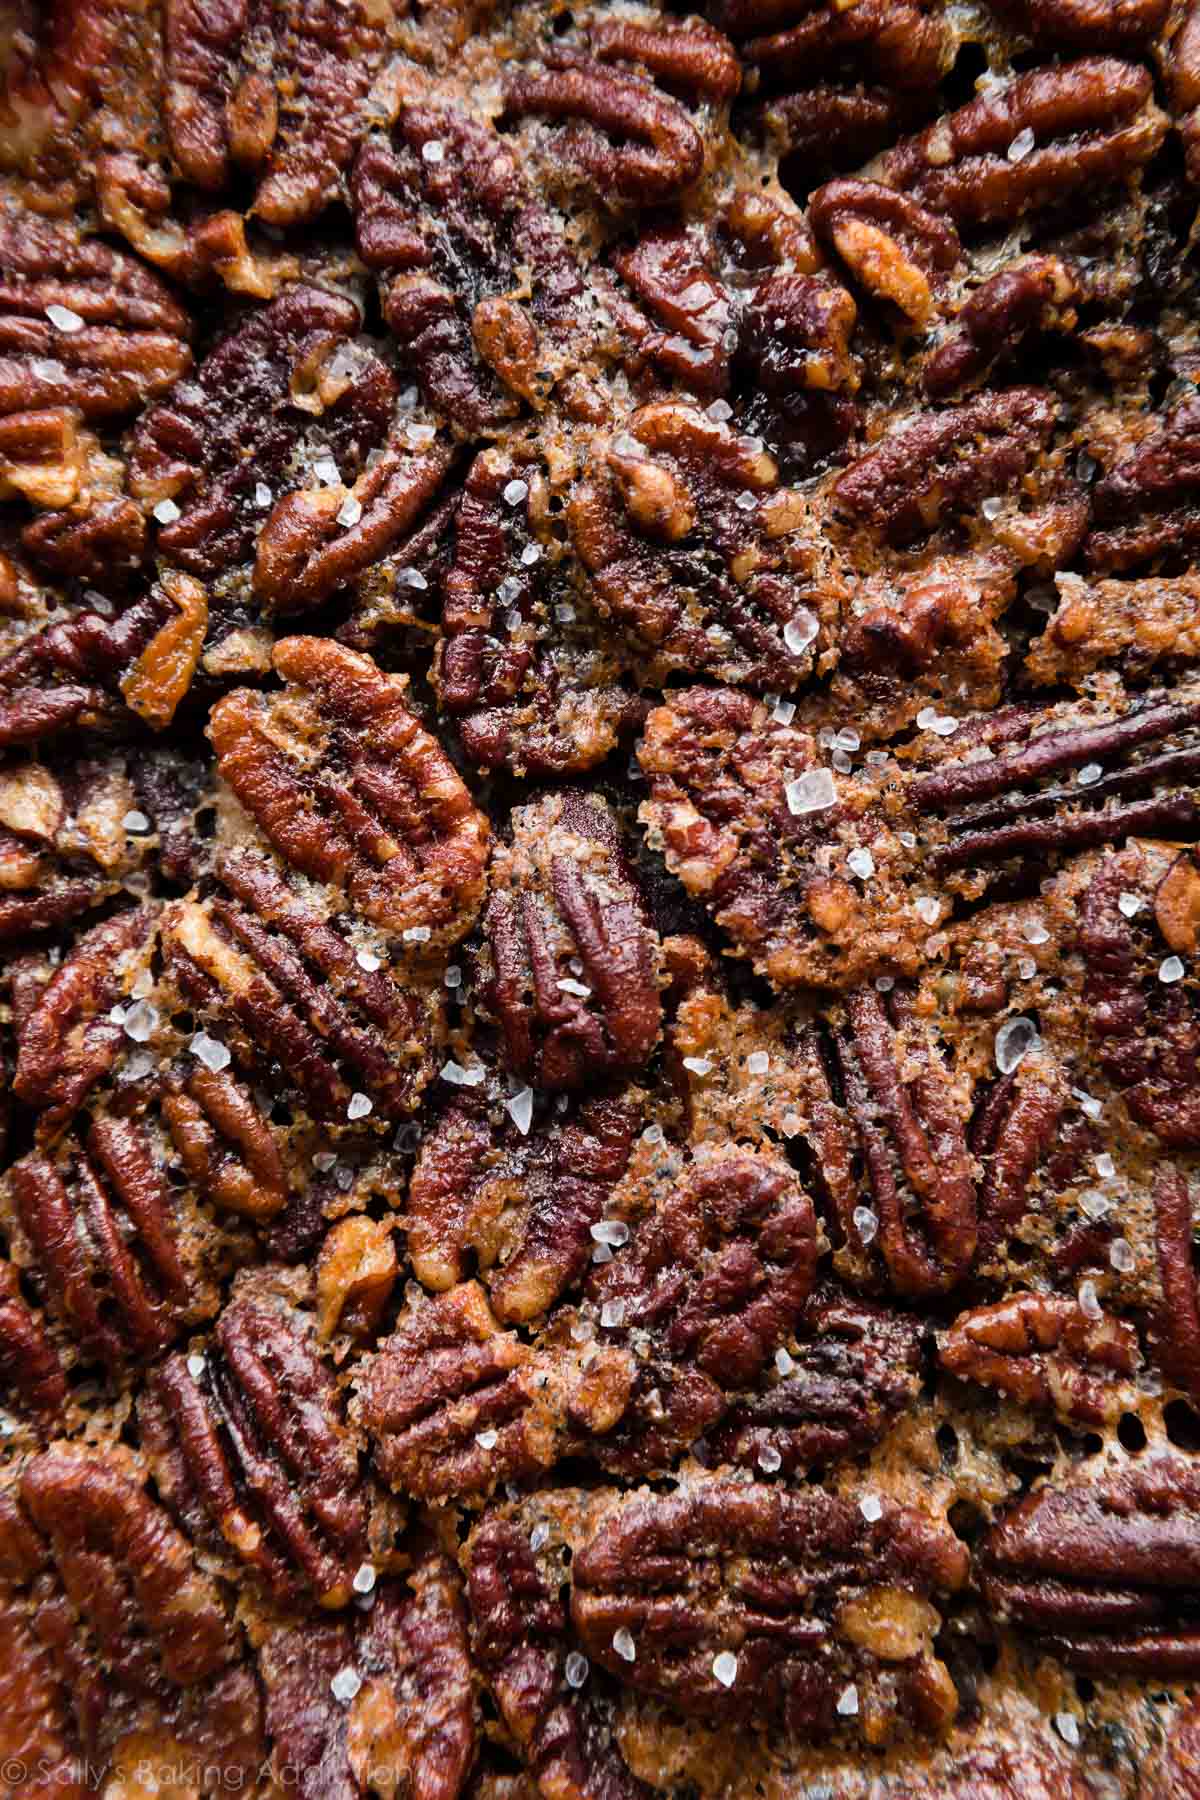 zoomed in image of maple pecan pie filling after baking